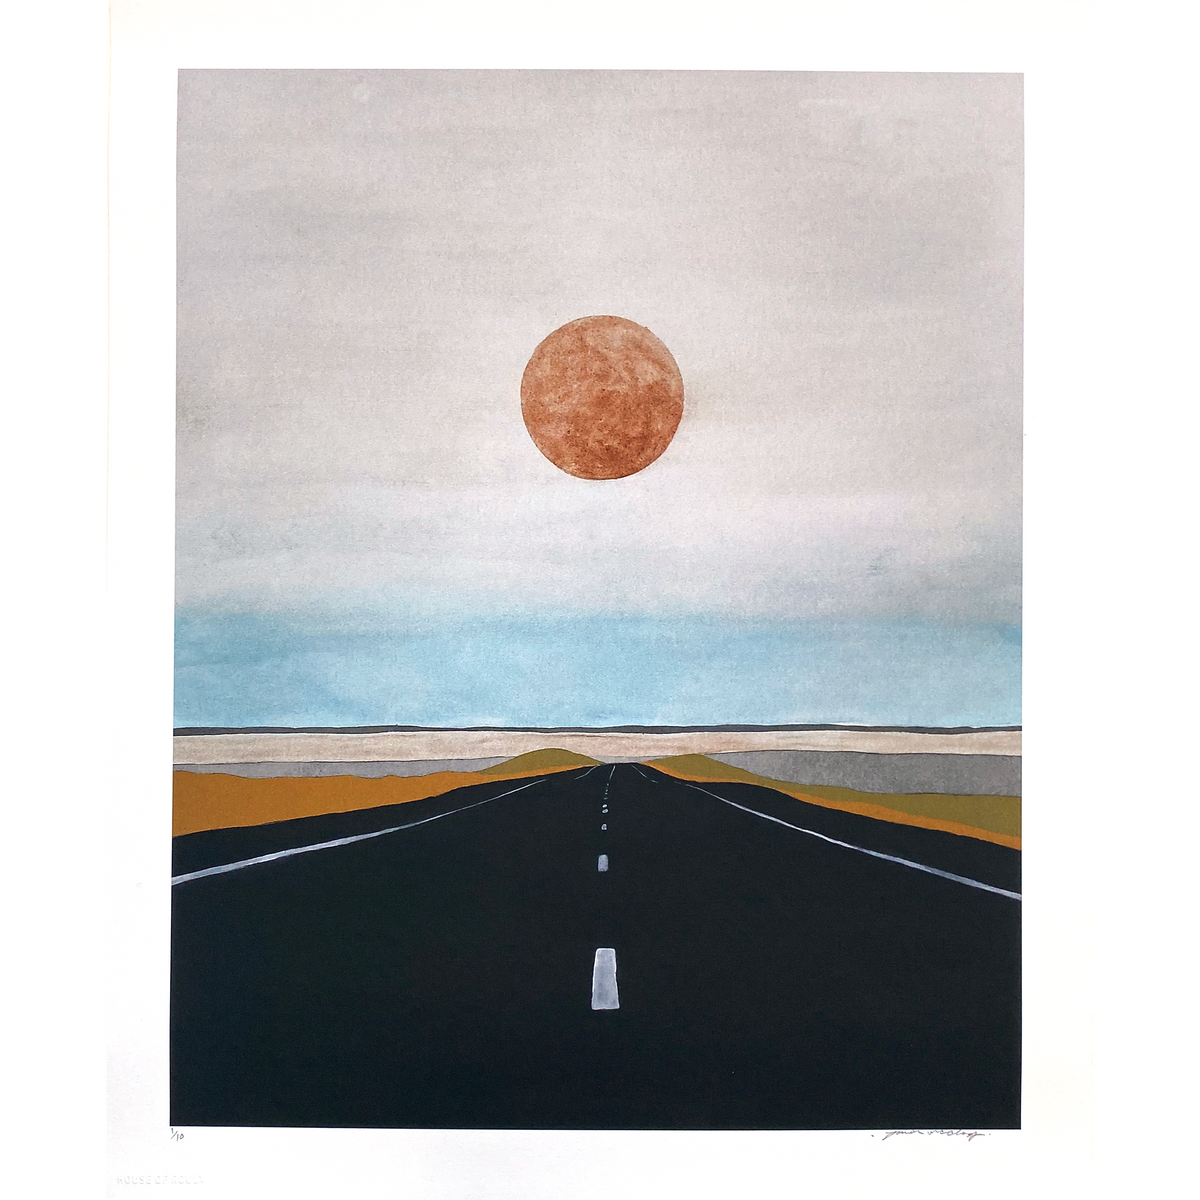 James McClung &quot;The Road is Always Open&quot; - Archival Print, Limited Edition of 10 - 14 x 17&quot;